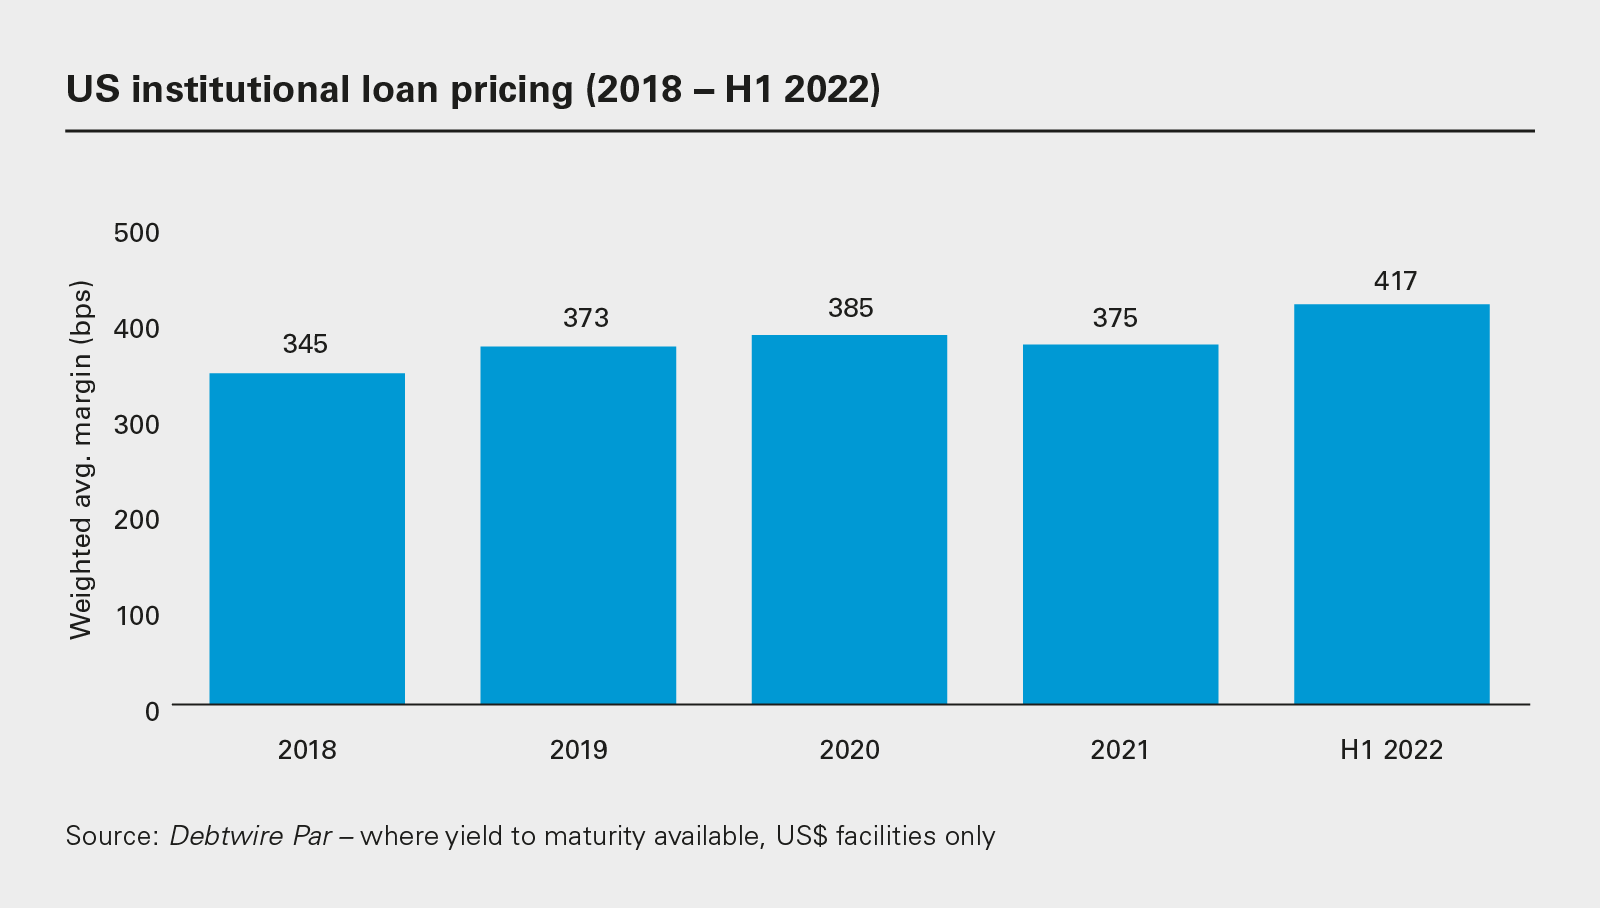 US institutional loan pricing (2018 − H1 2022)